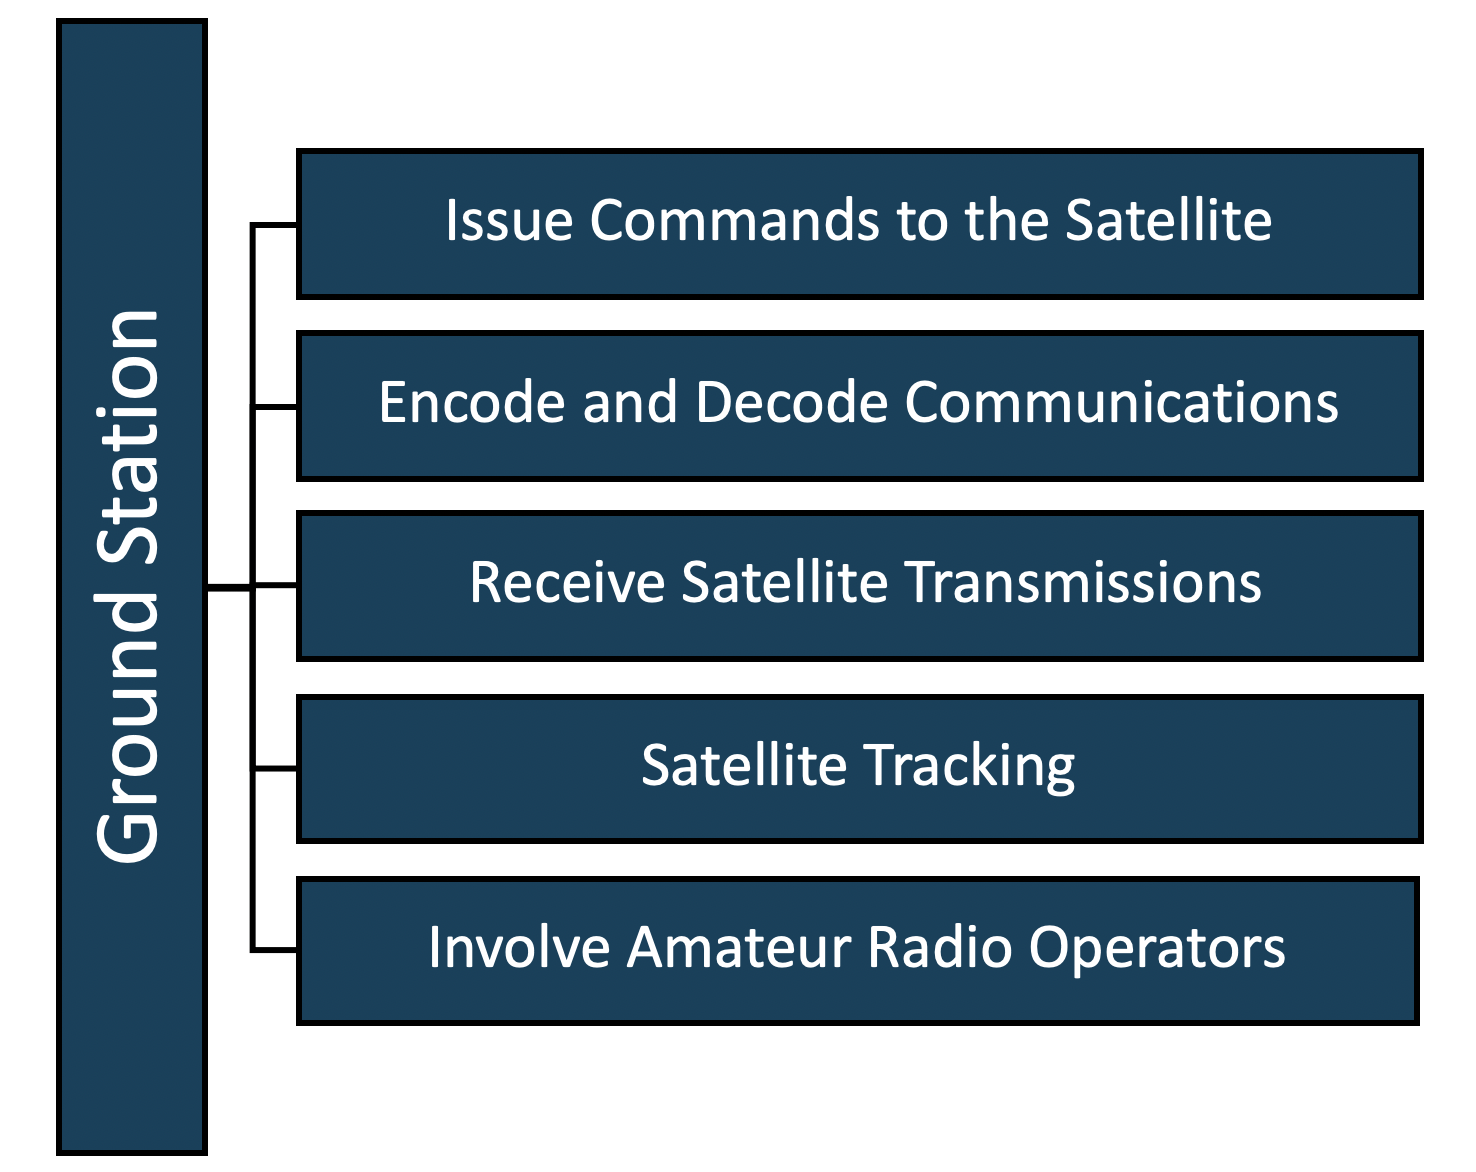 Ground Station
                    Issue Commands to the Satellite
                    Encode and Decode Communications
                     Receive Satellite Transmissions
                    Satellite Tracking
                    Involve Amateur Radio Operators
                